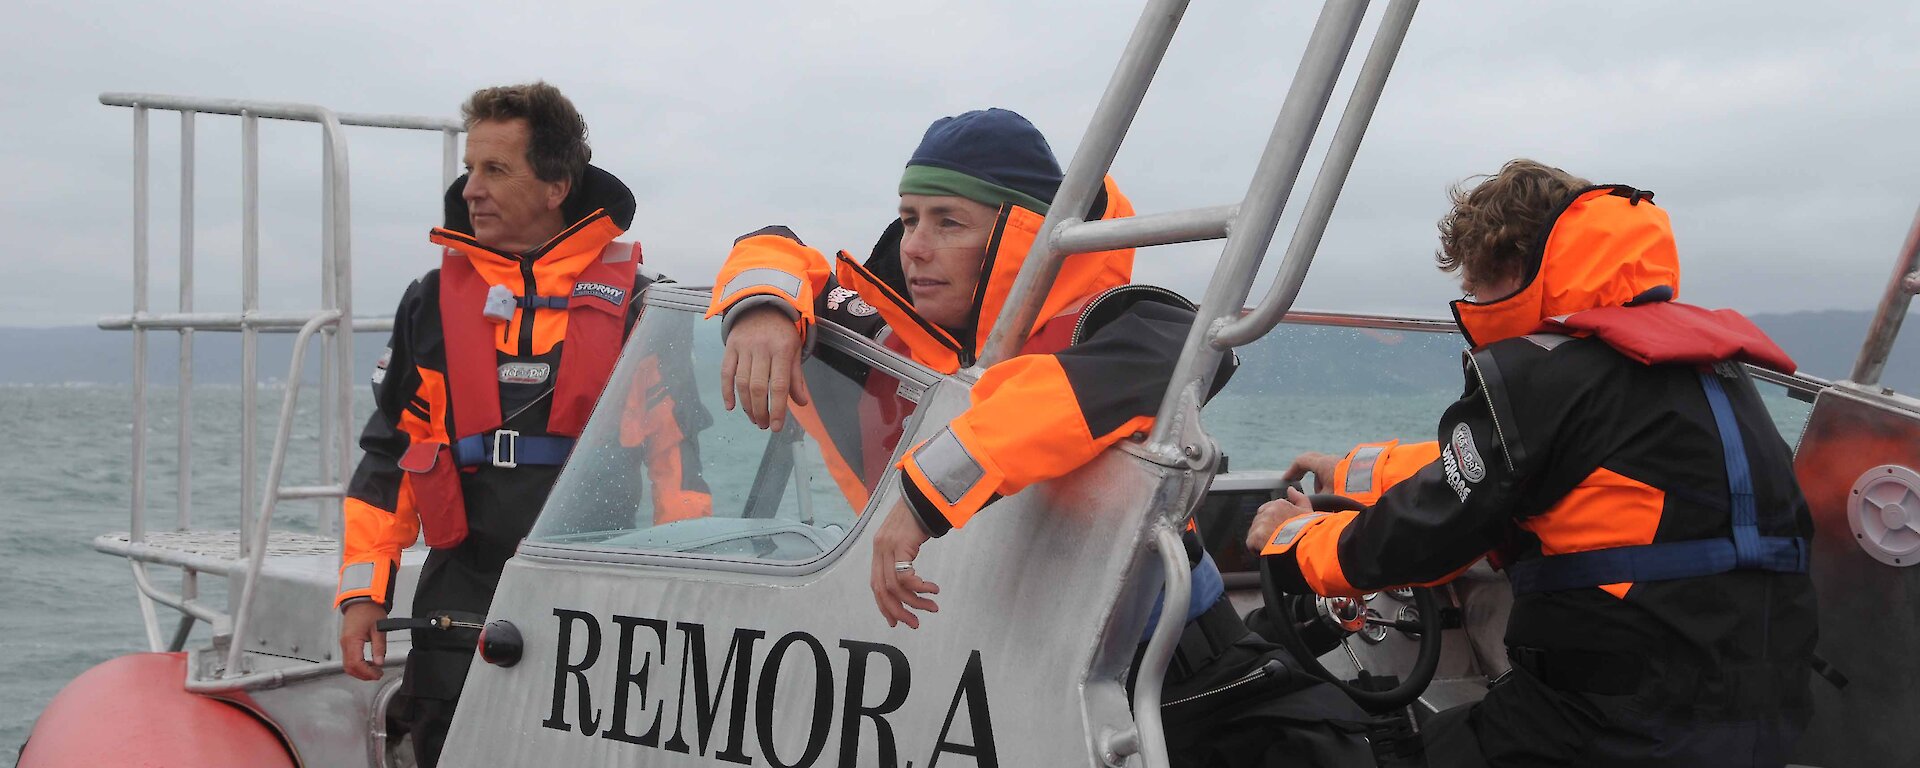 The research team undergoing small boat training prior to the voyage